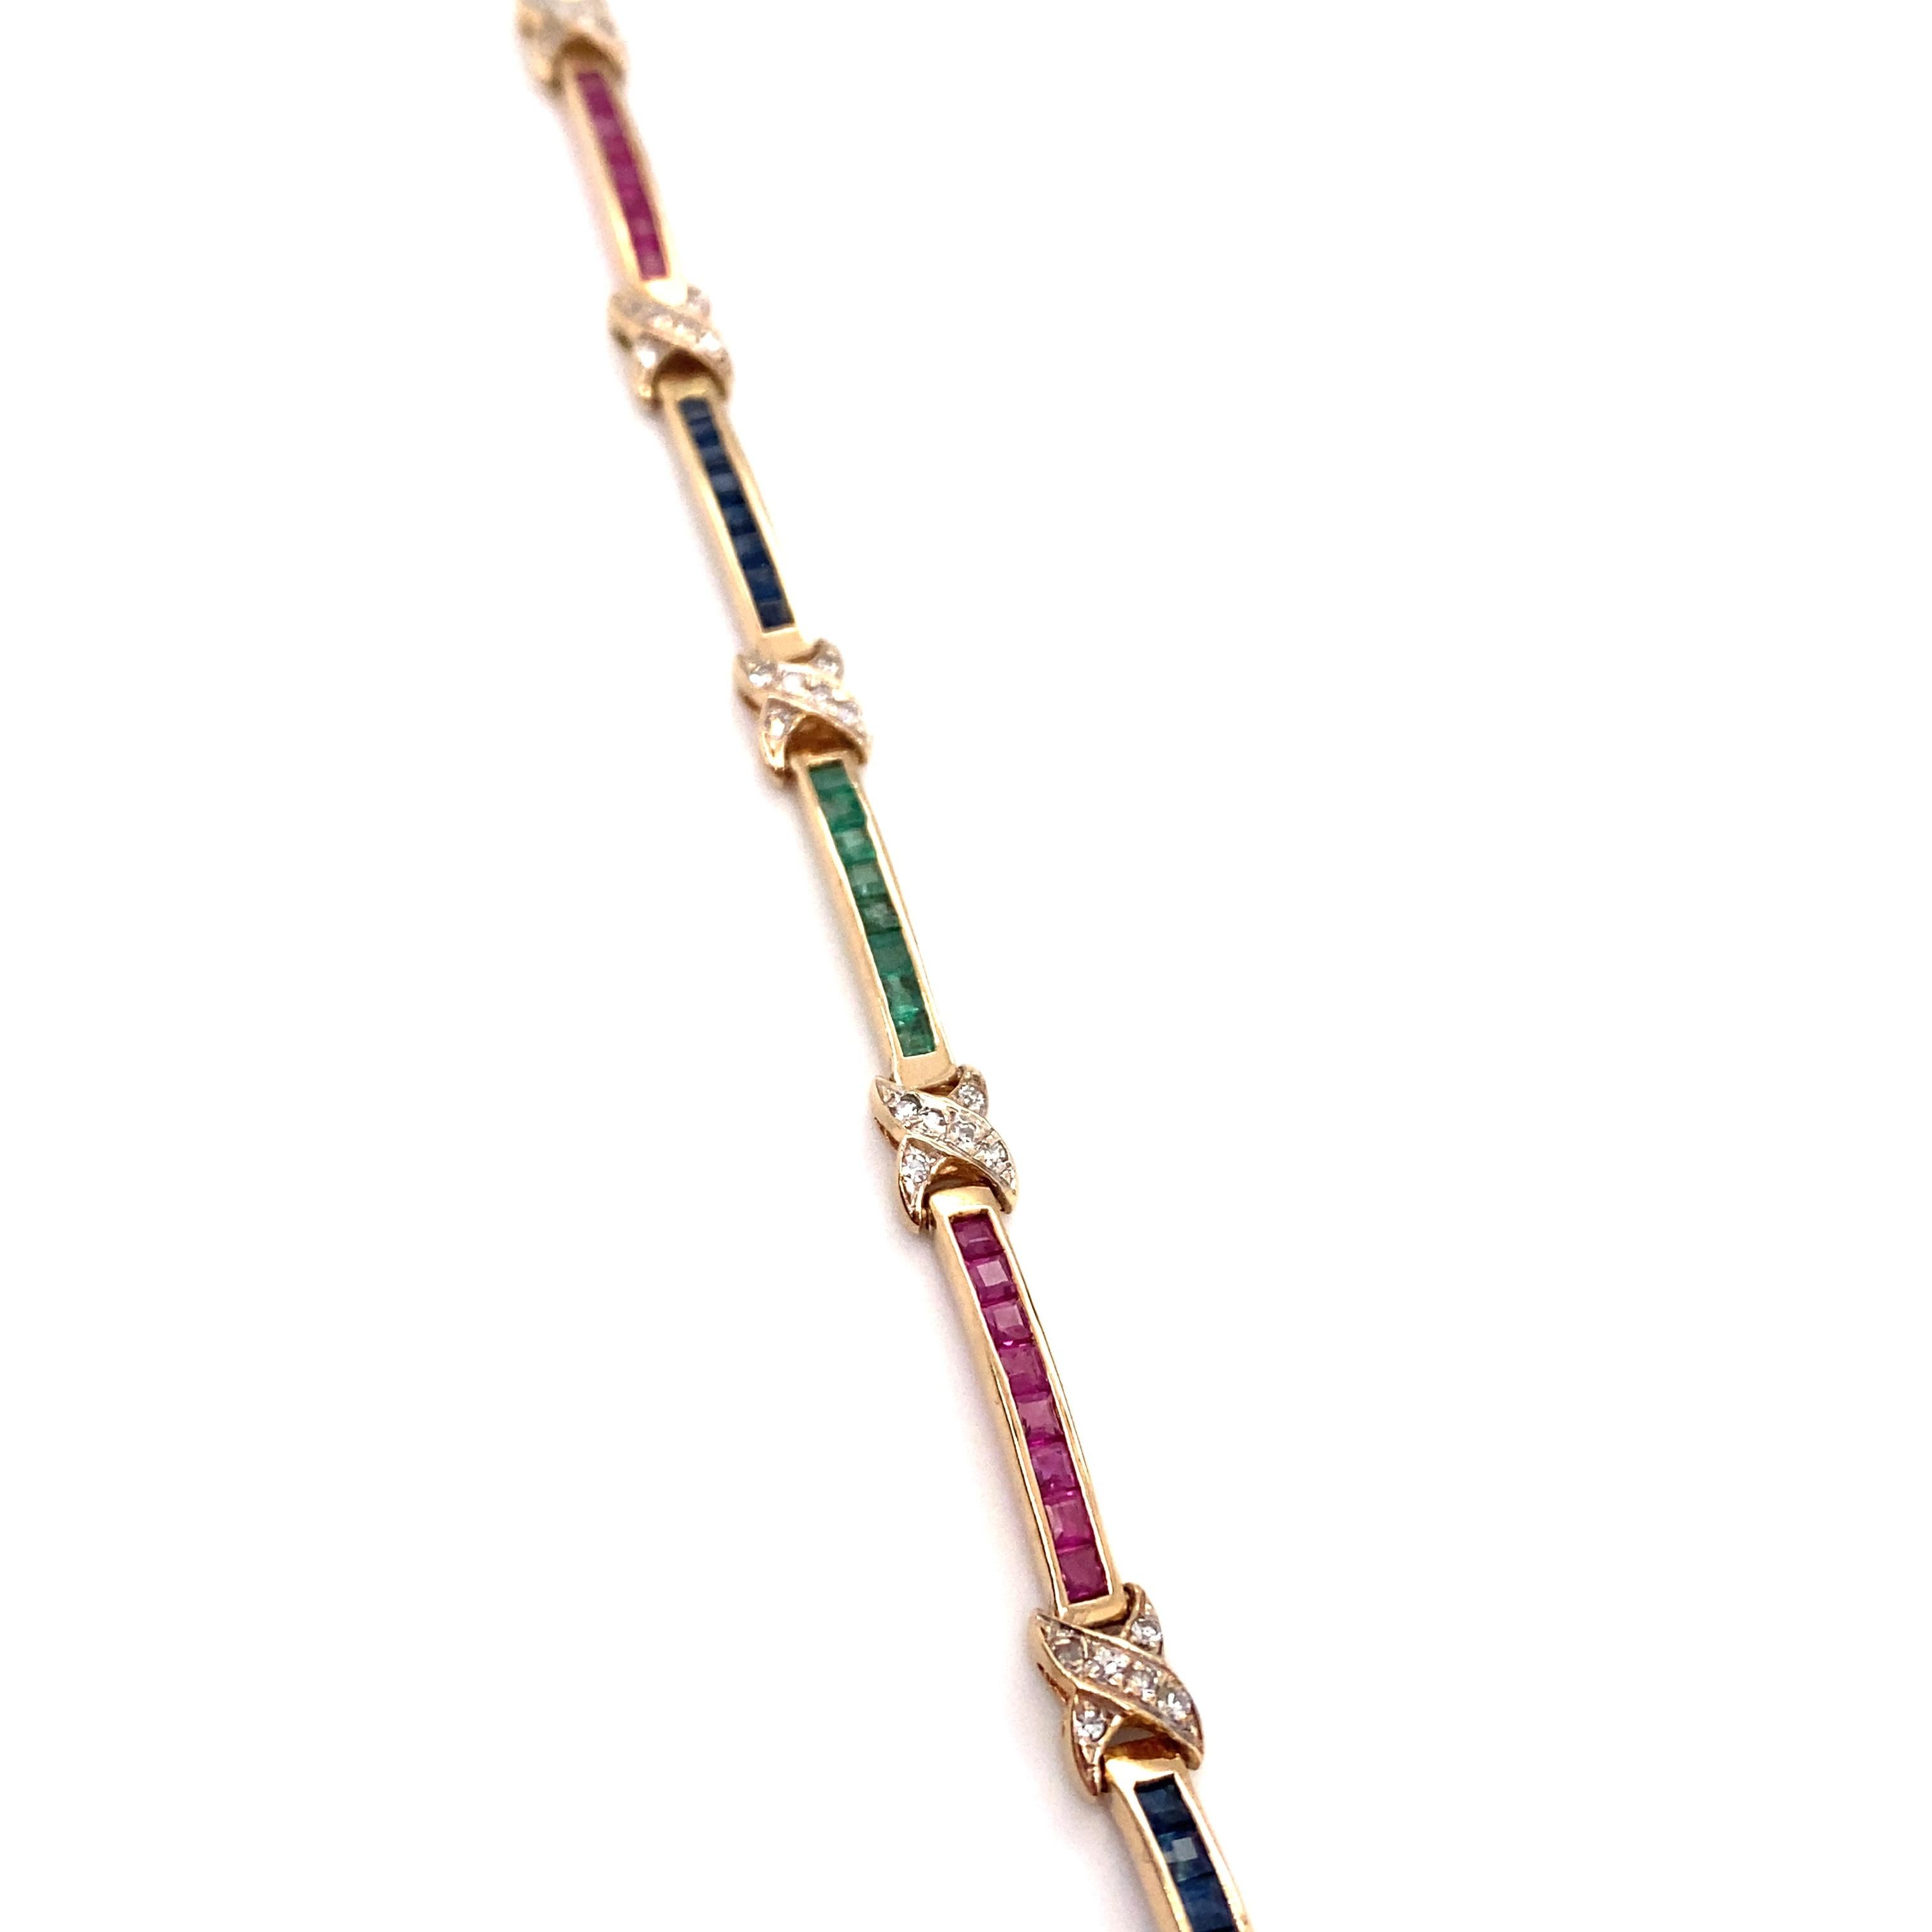 Item Details: This Tutti Frutti style bracelet features links with emeralds, sapphires, rubies and diamonds in a channel set design.

Circa: 1980s
Metal Type: 14k gold
Weight: 9.5 grams 
Dimensions: 7.75in length